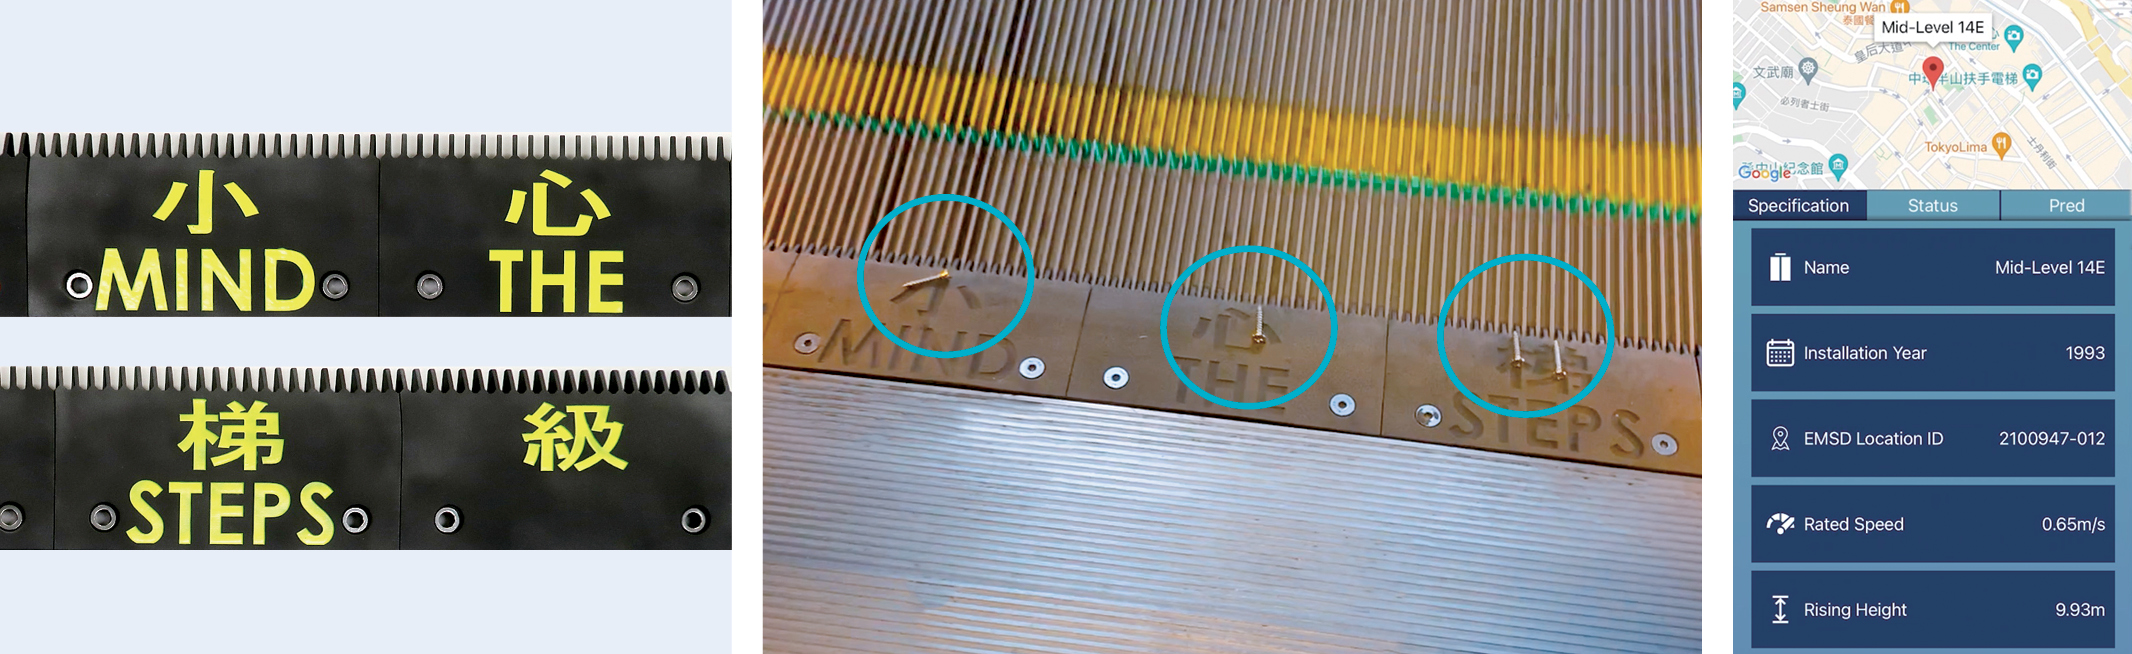 Ir Dr Curtis Ng of PolyU collaborates with EMSD and industry partners to develop a new type of sensing escalator comb (left) that can bounce away foreign objects (middle) and enable real-time escalator monitoring (right).